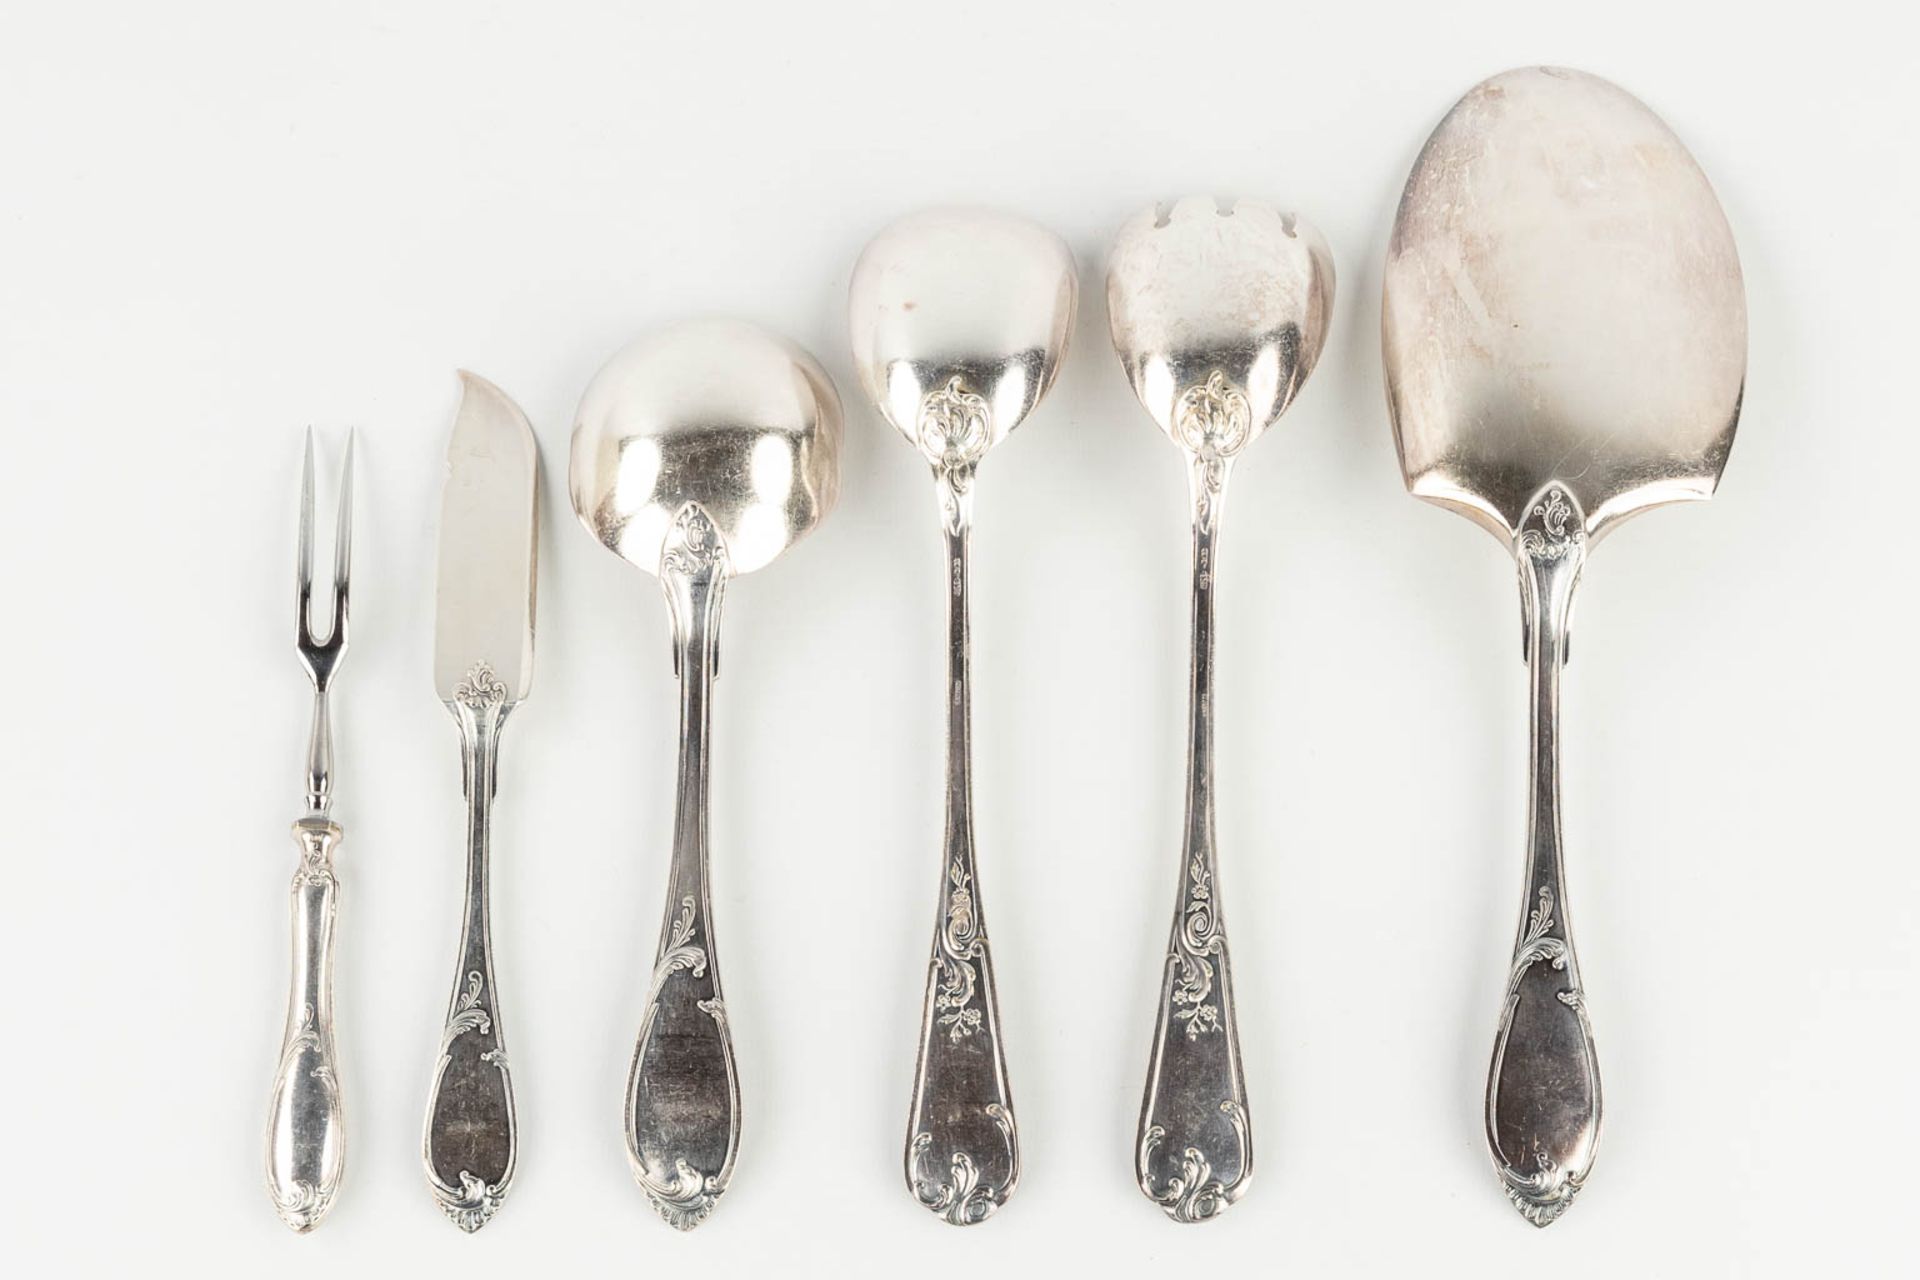 B. Wiskemann, Bruxelles, a silver-plated cutlery set, Louis XV style. (L: 30 x W: 39 x H: 22 cm) - Image 14 of 24